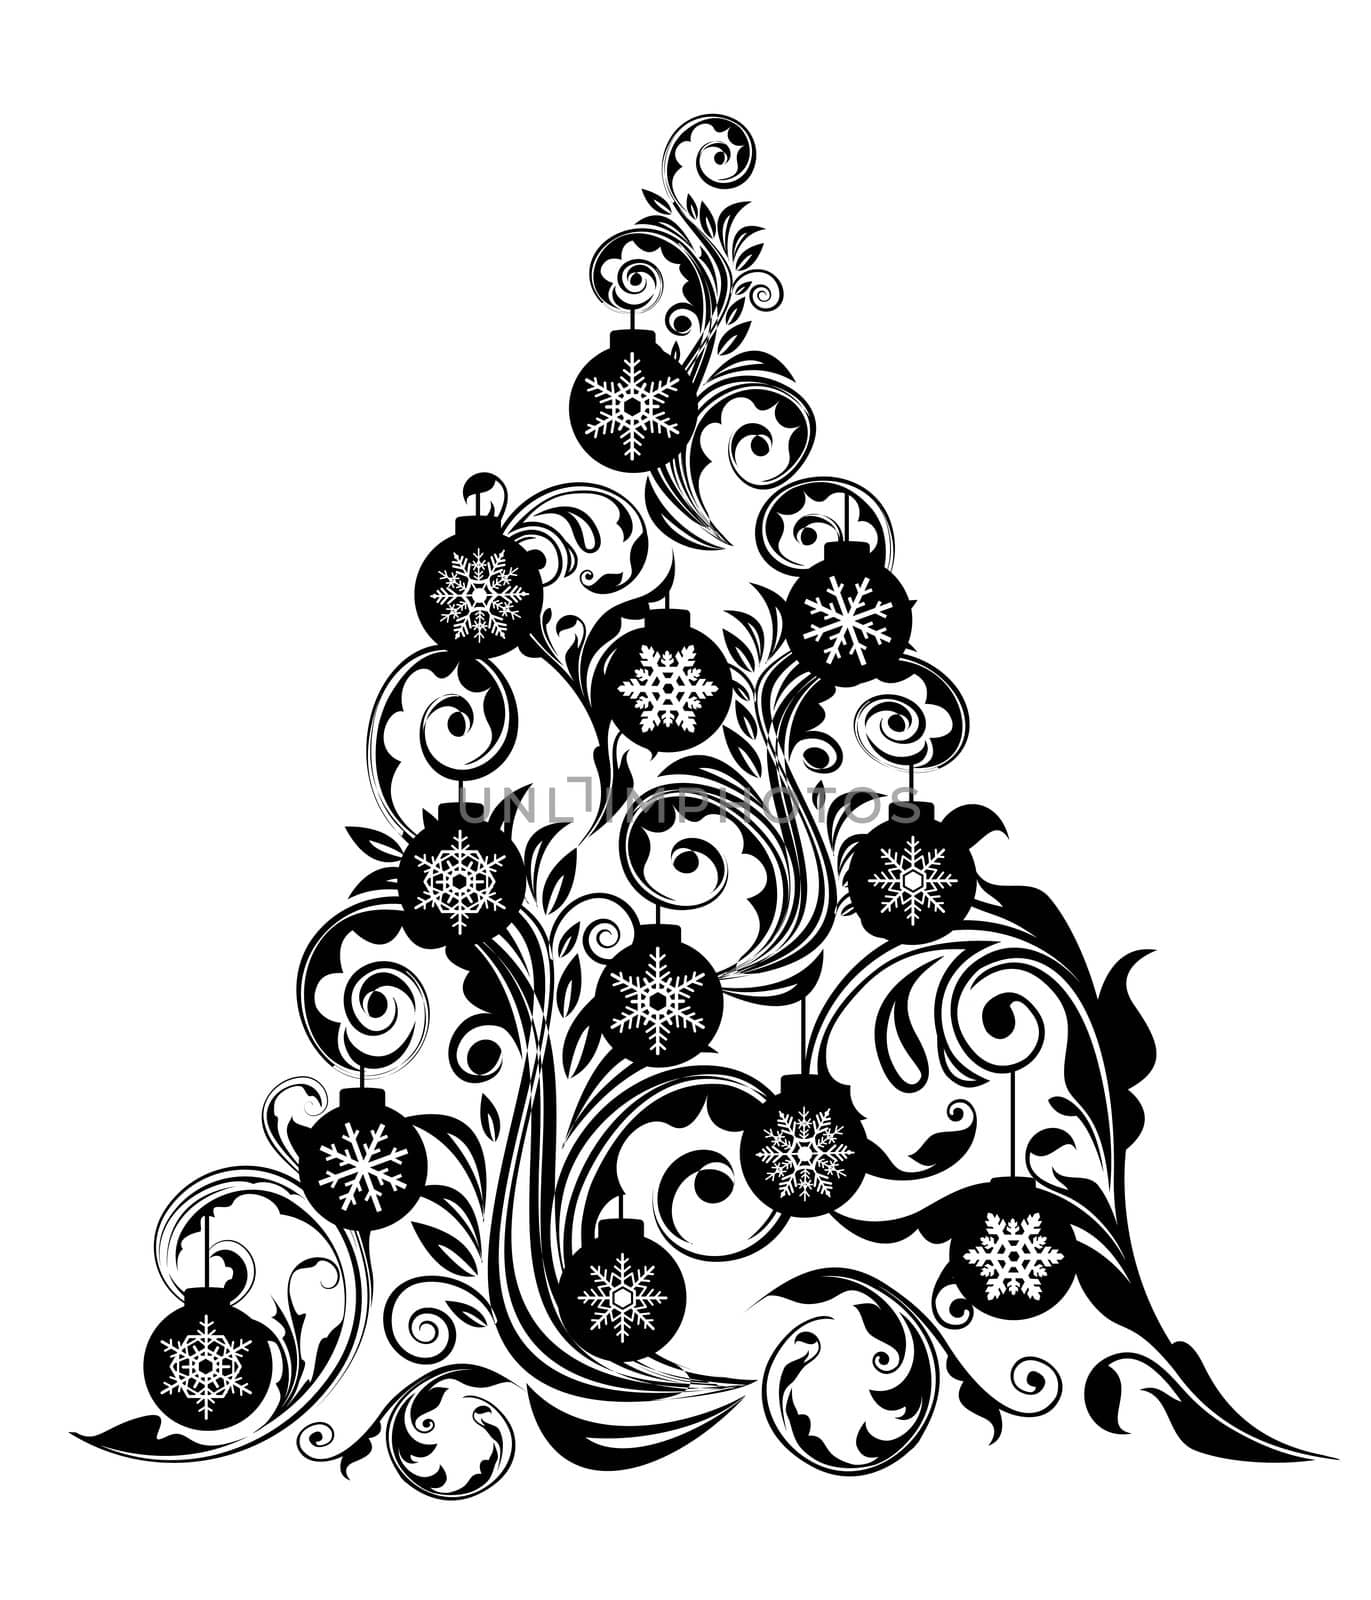 Christmas Tree with Swirl Leaves Design and Snowflakes Ornaments Clipart Illustration